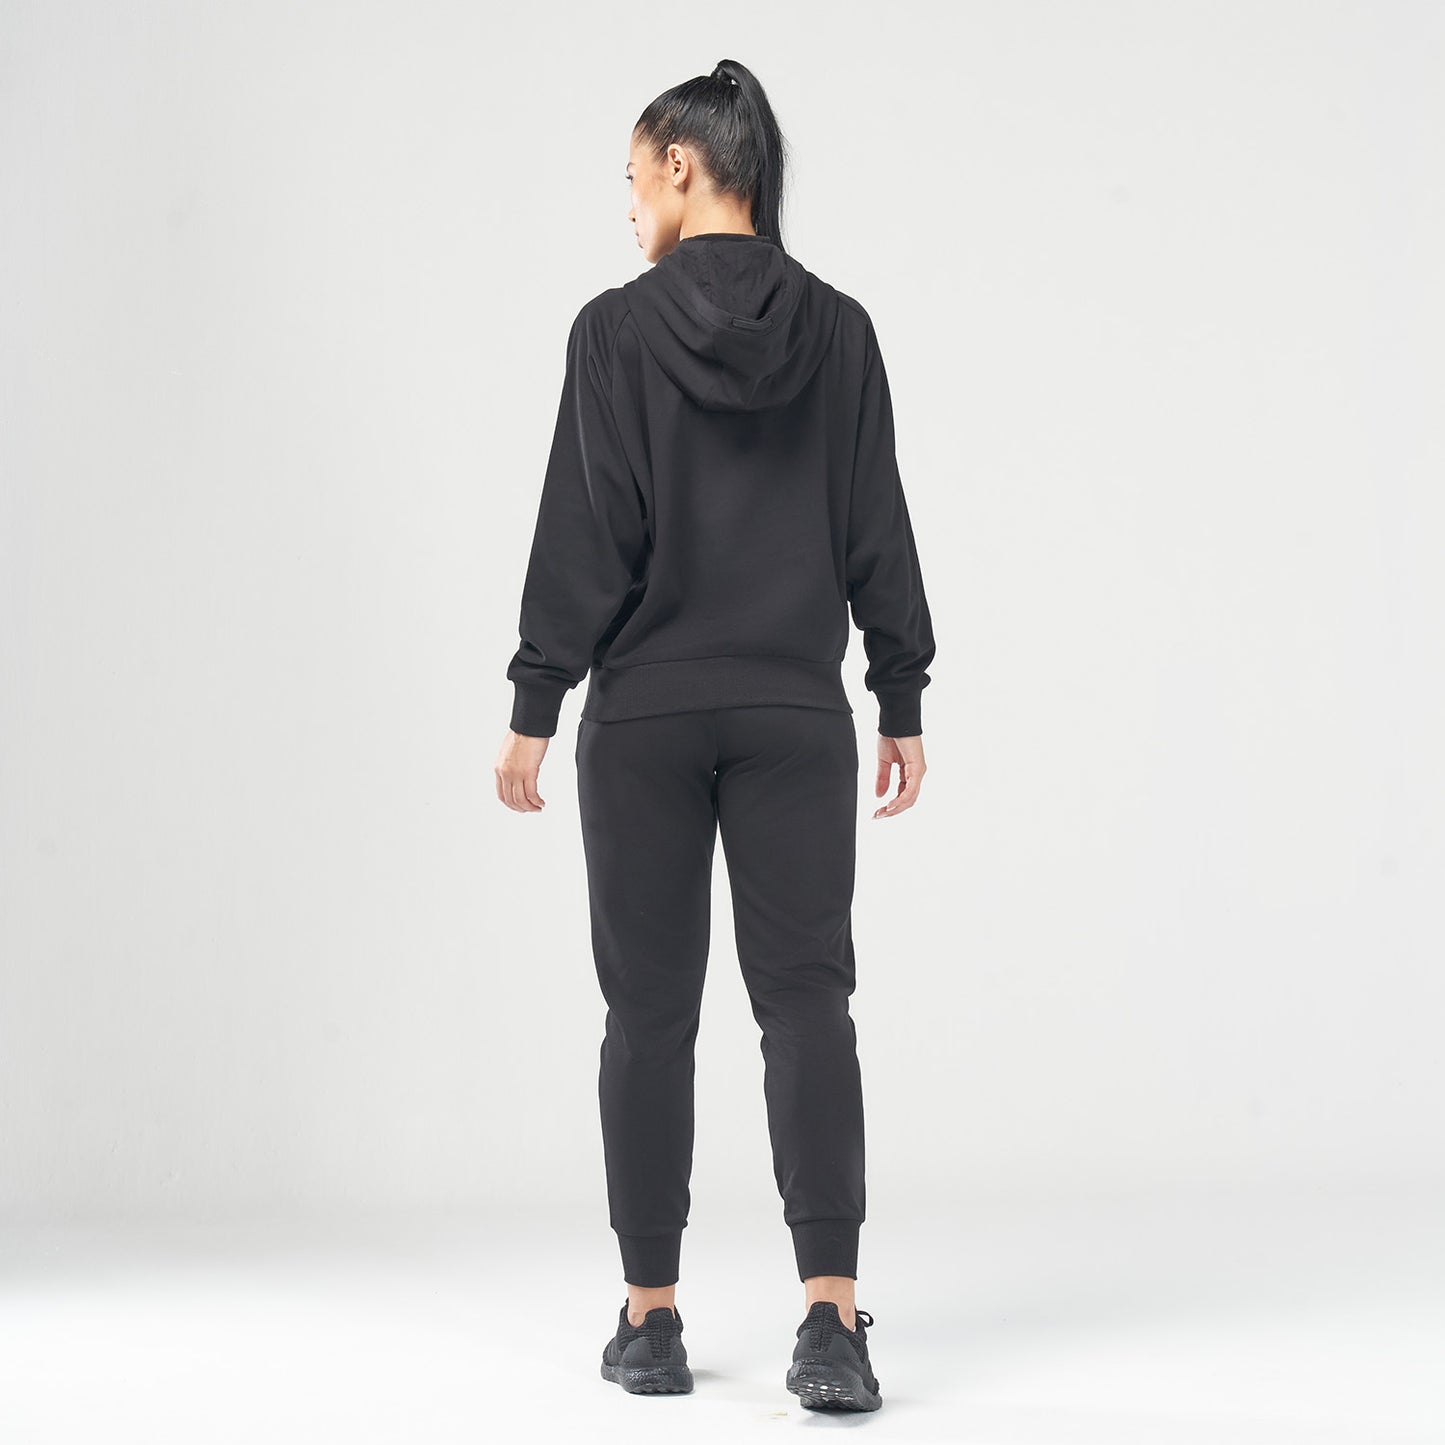 squatwolf-workout-clothes-code-batwing-hoodie-black-gym-hoodies-women